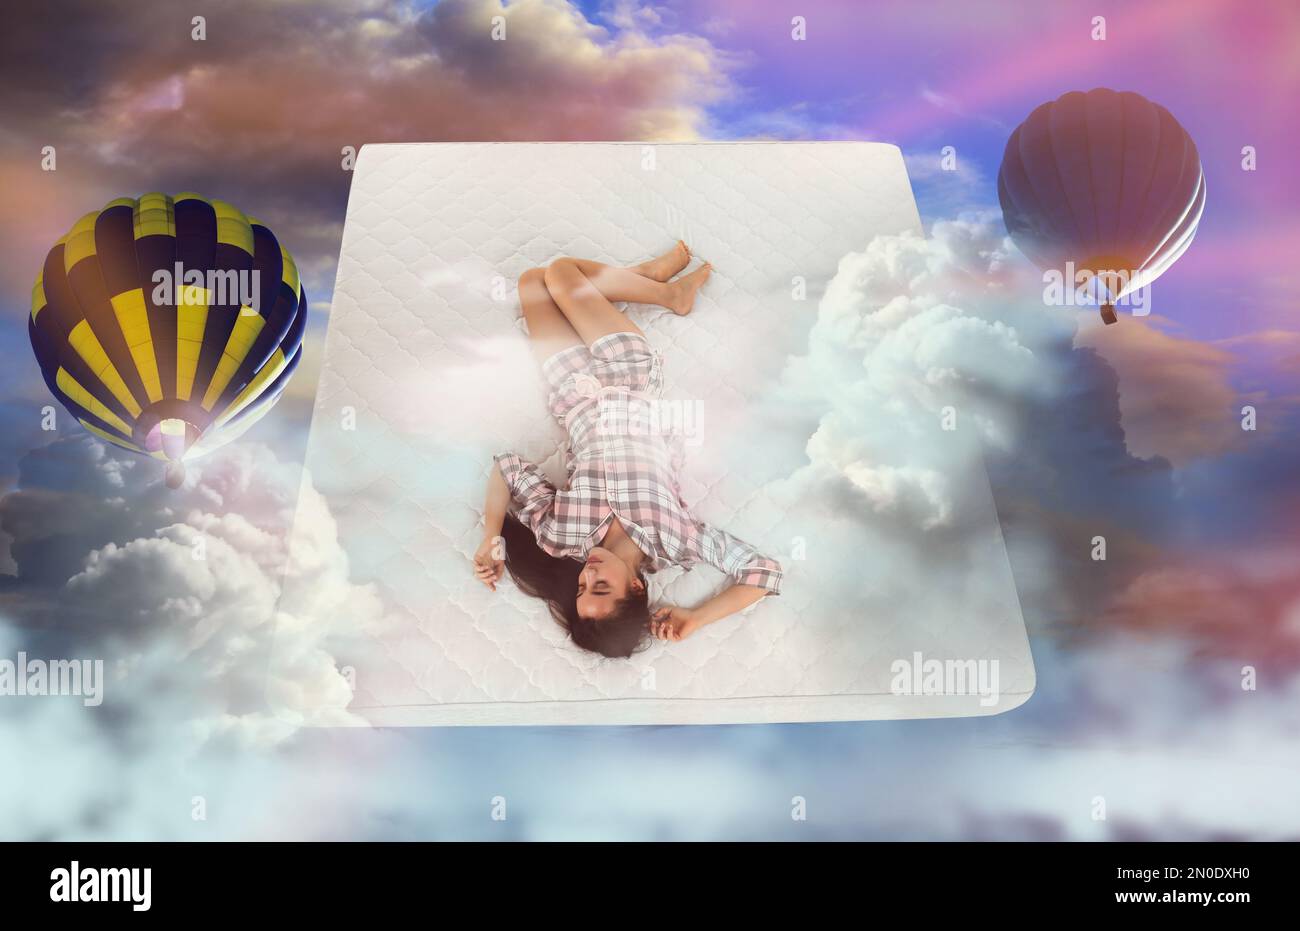 Sweet dreams. Bright cloudy sky with hot air balloons around sleeping young woman Stock Photo